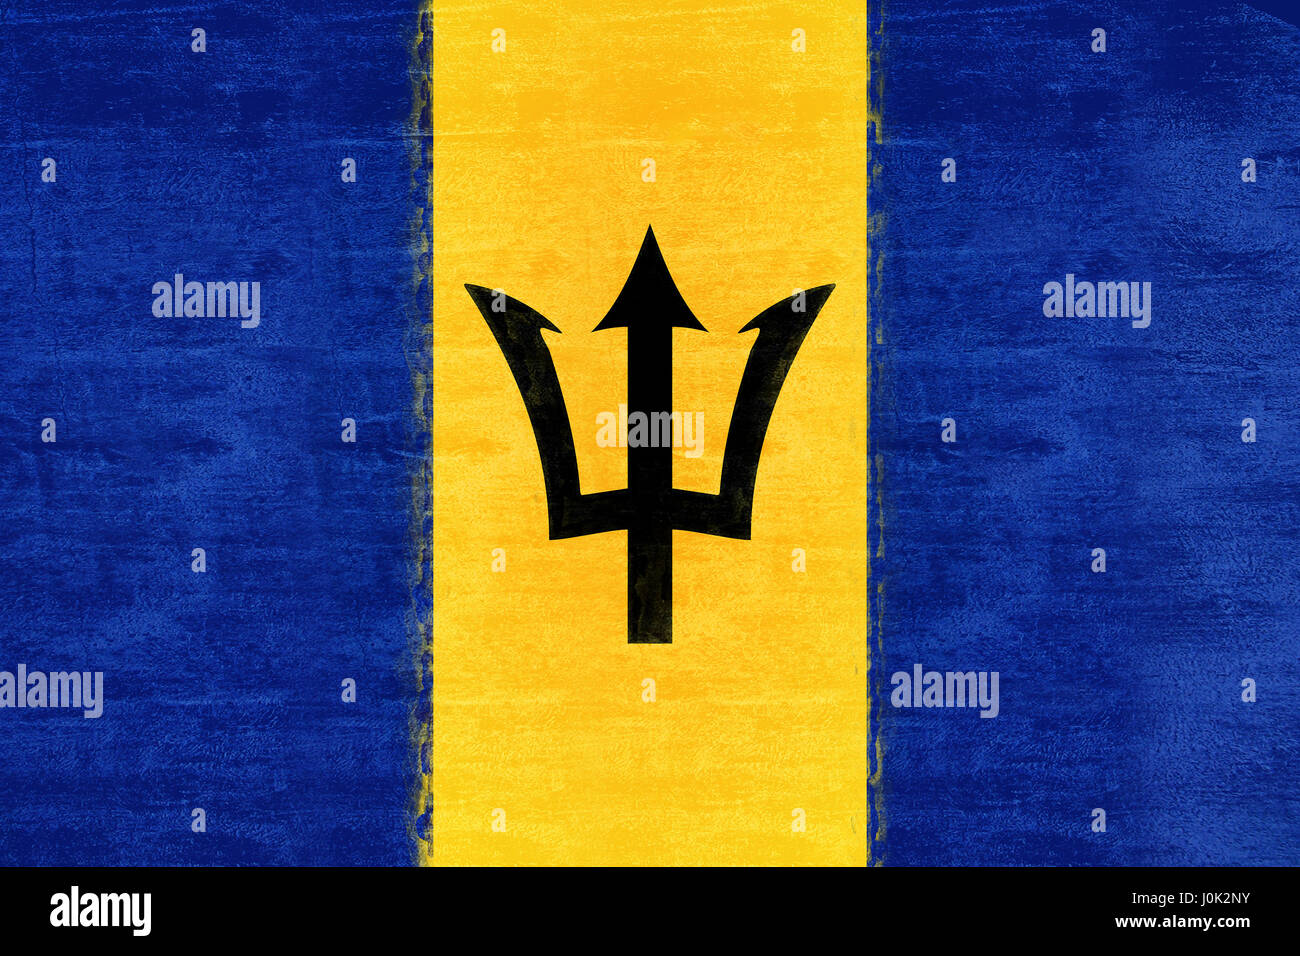 Illustration of the flag of Barbados Grunge Stock Photo